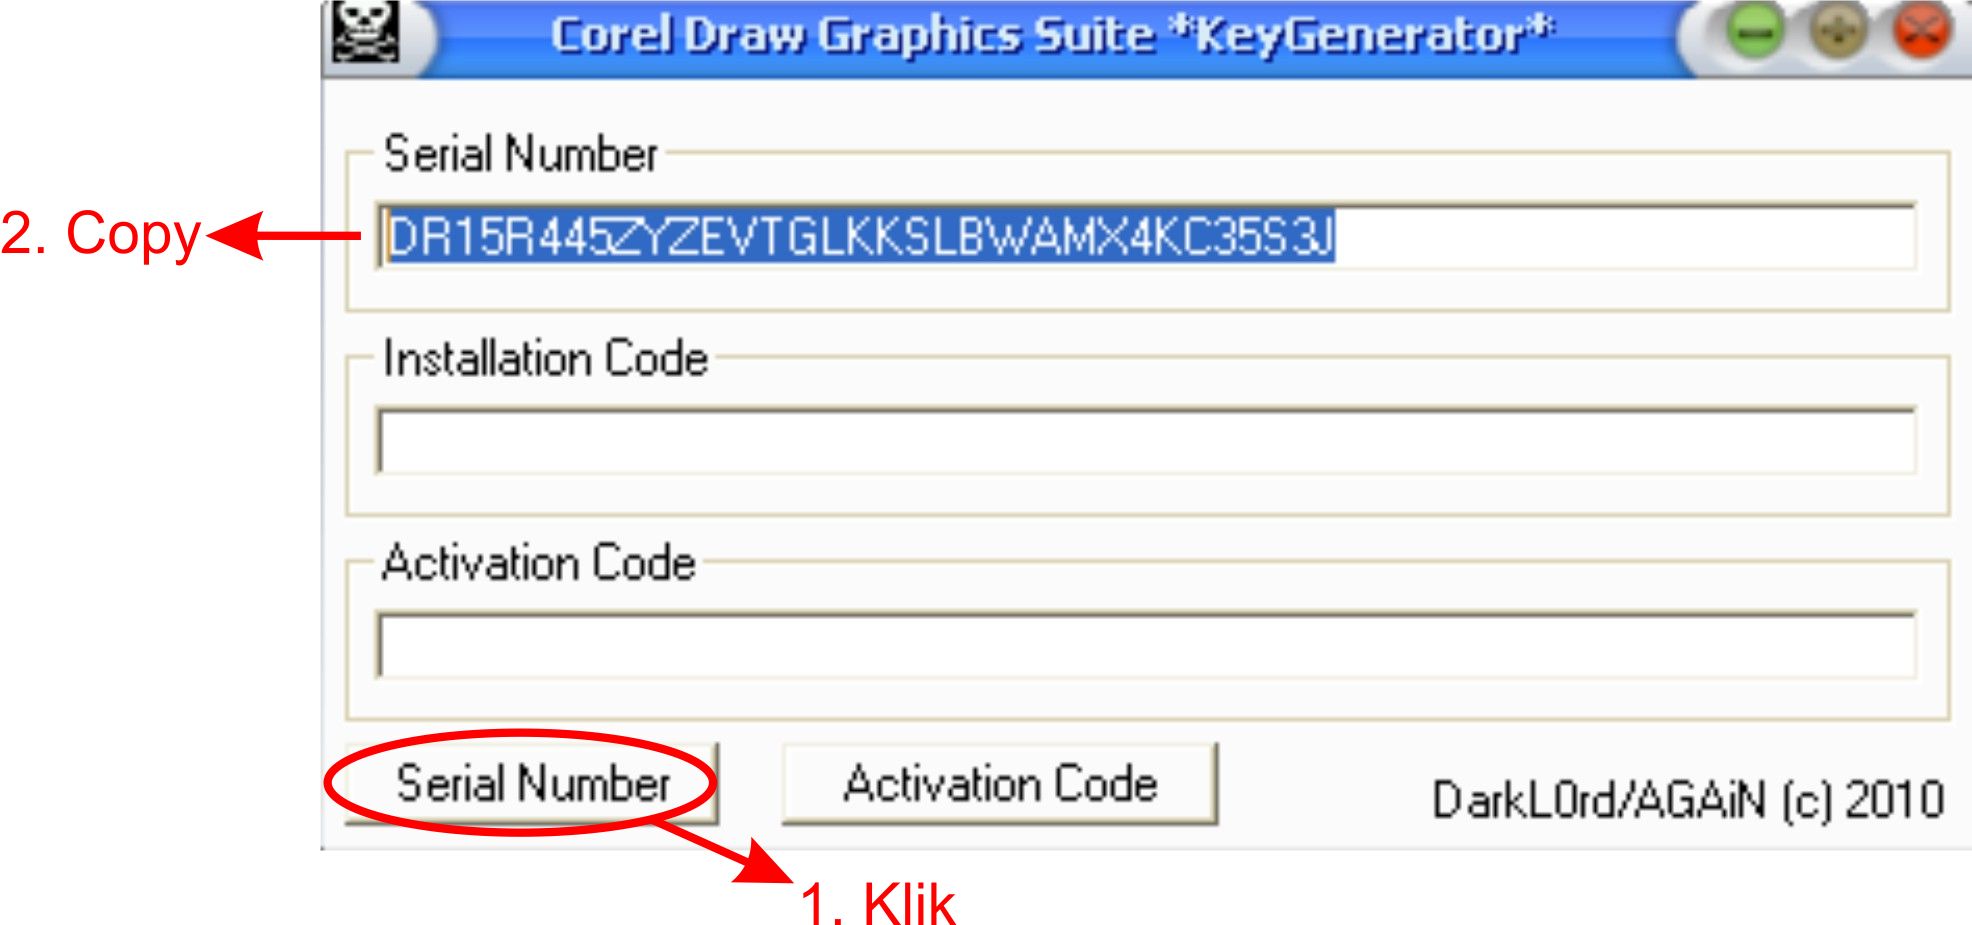 corel draw 11 free download full version with serial key